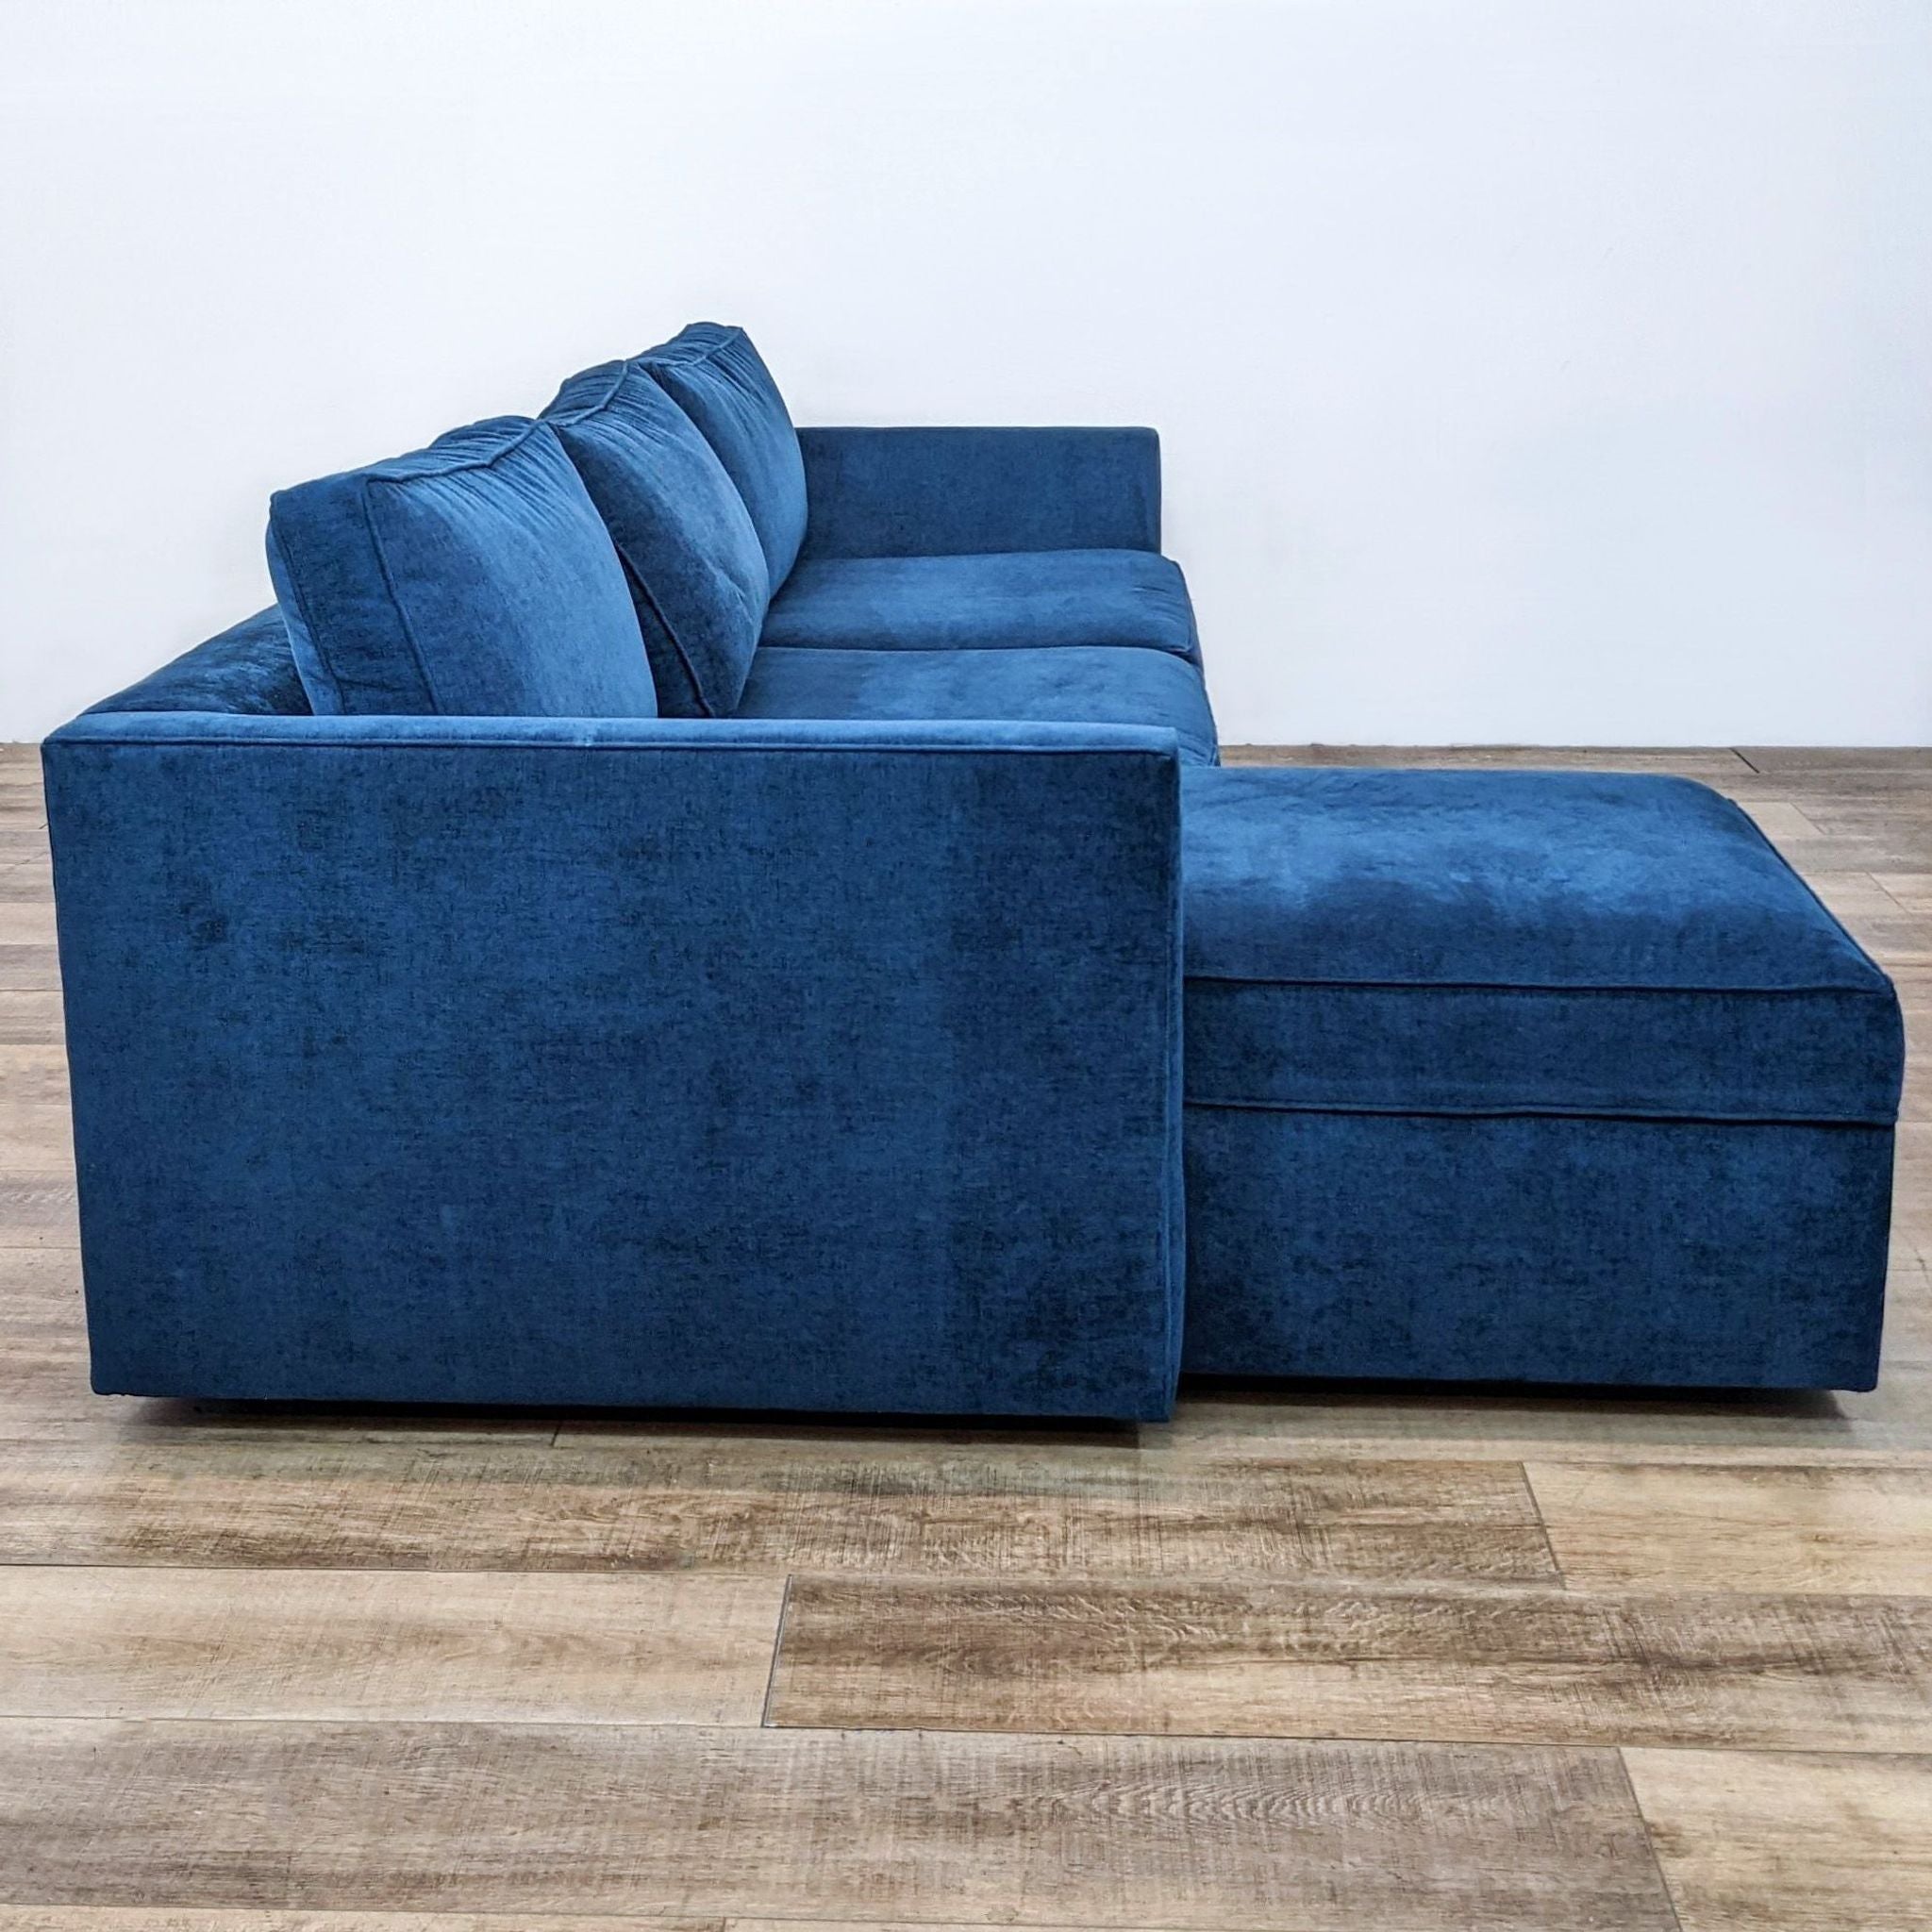 Alt text: Ink blue West Elm distressed velvet two-piece sectional with chaise, narrow arms, and clean lines on a wooden floor.